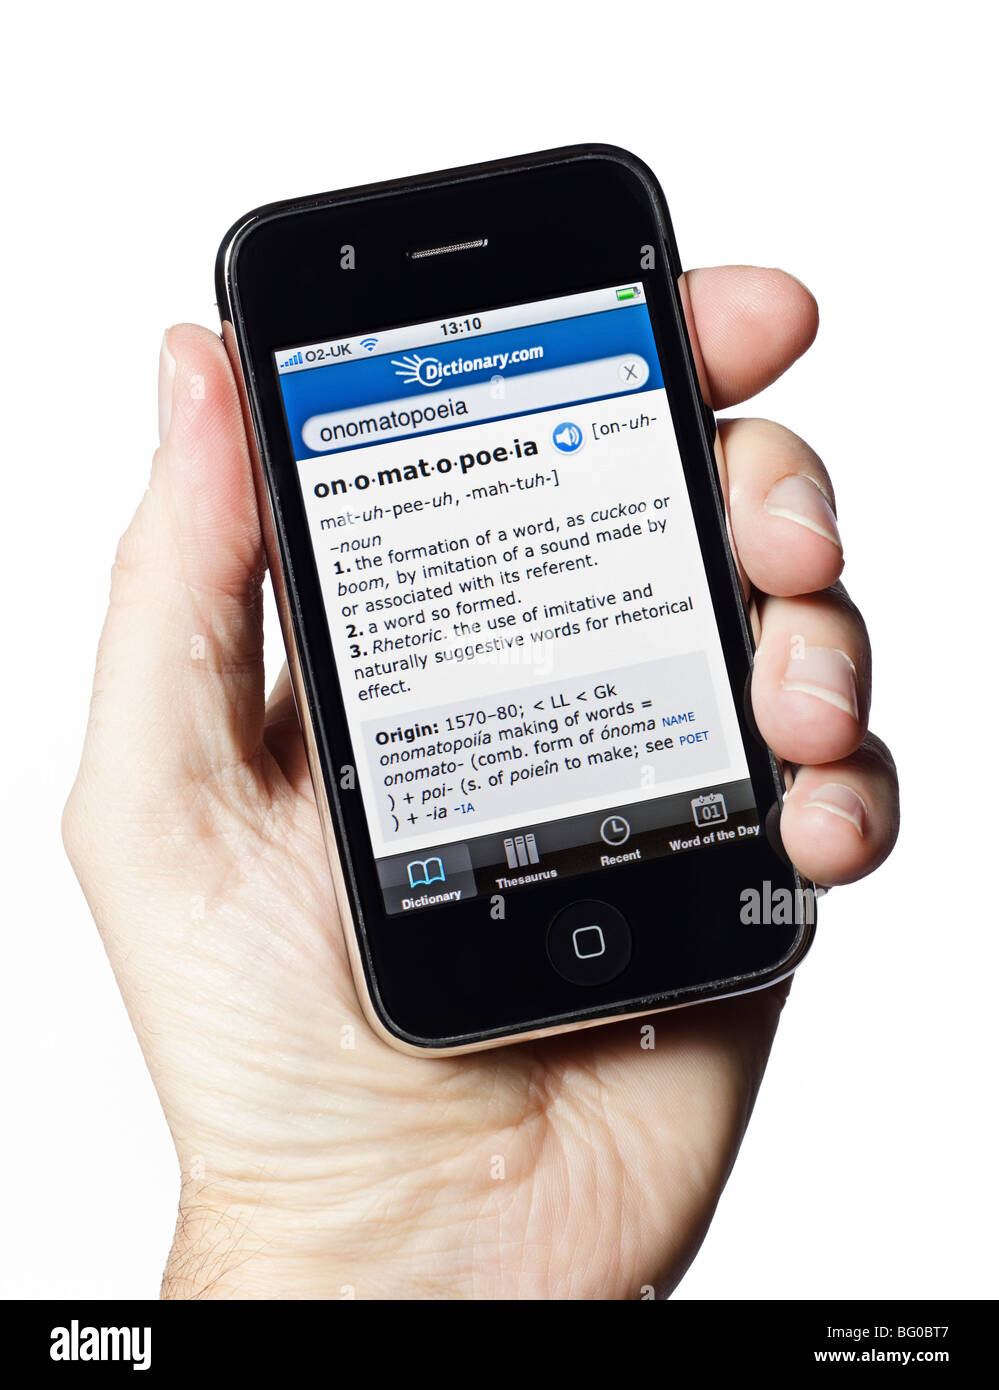 Male hand holding iPhone showing online Dictionary application Stock Photo